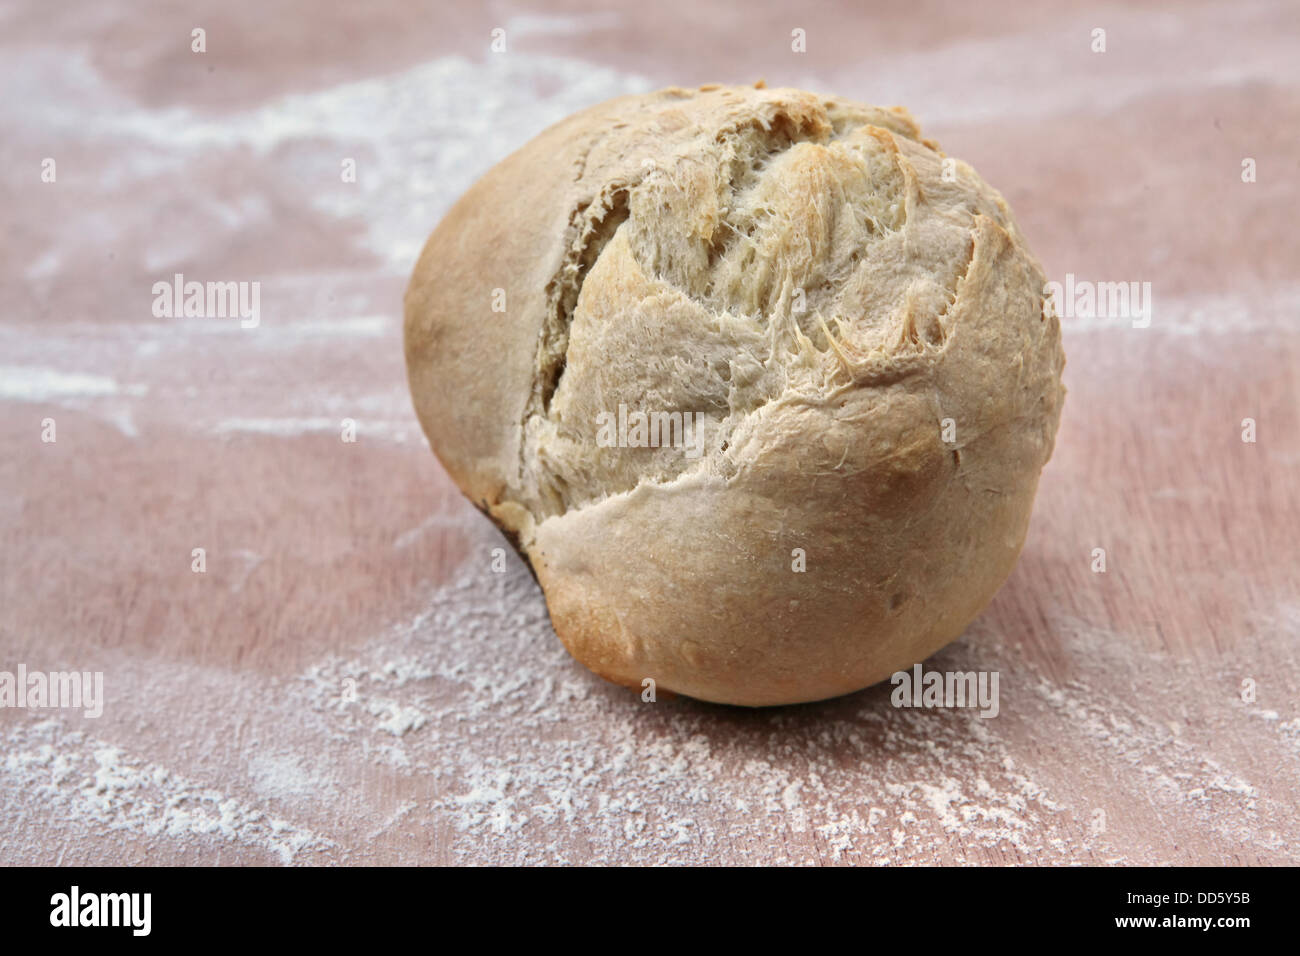 Freshly baked roll on a flour covered board in a bakery Stock Photo